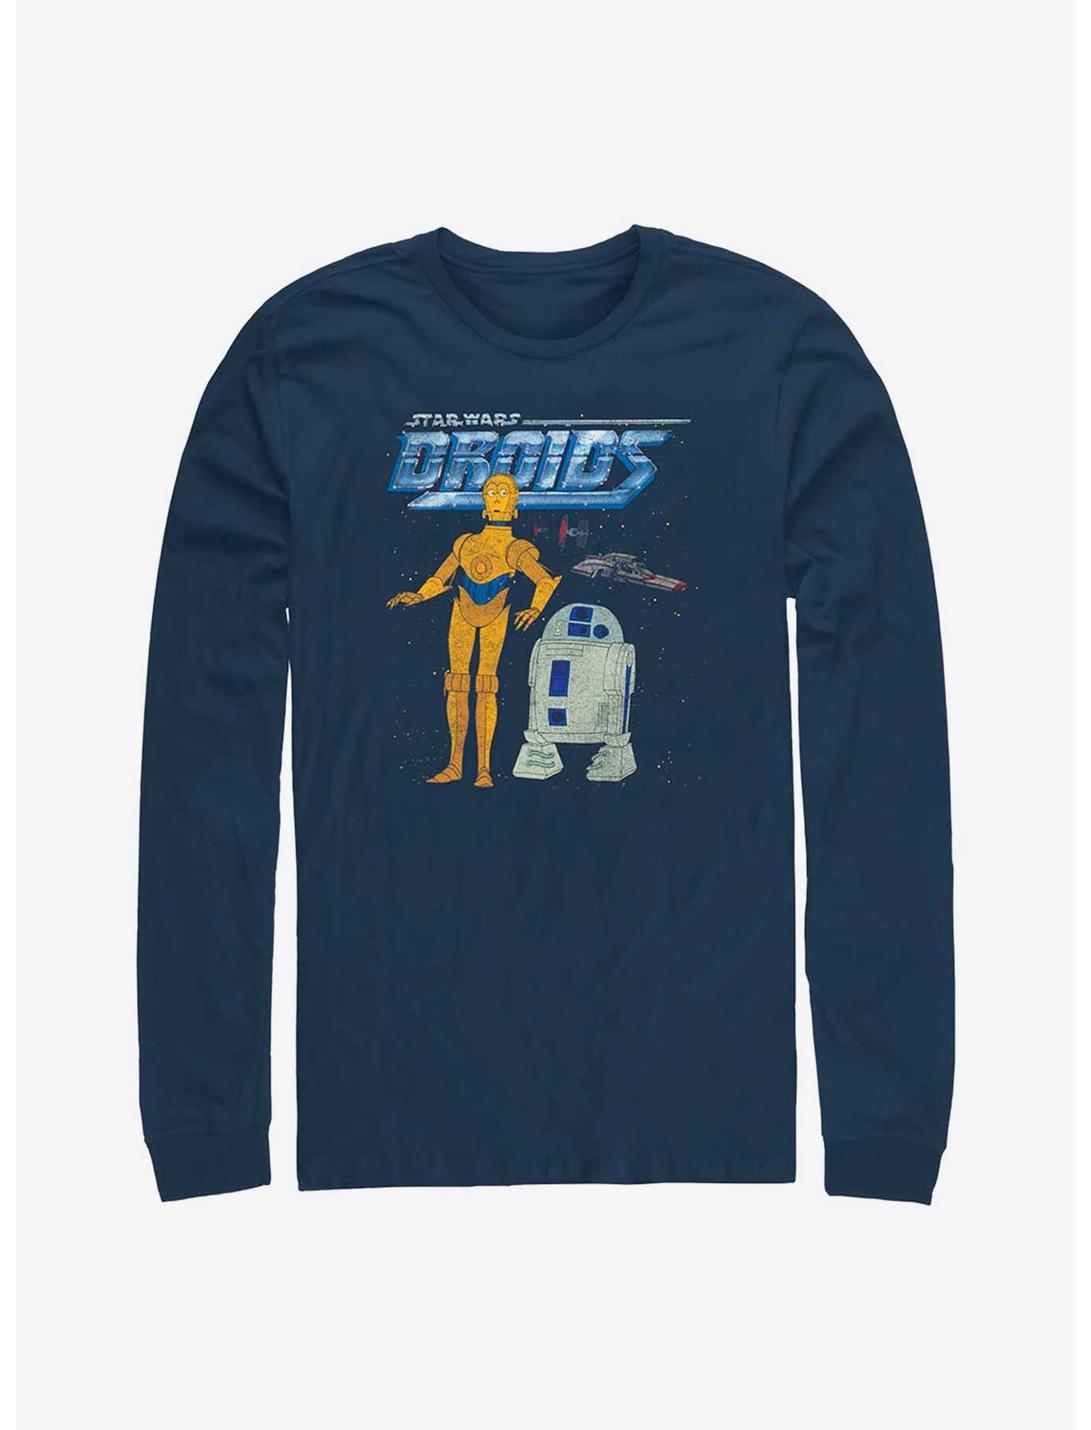 Star Wars R2-D2 And C-3PO Long Sleeve T-Shirt, NAVY, hi-res